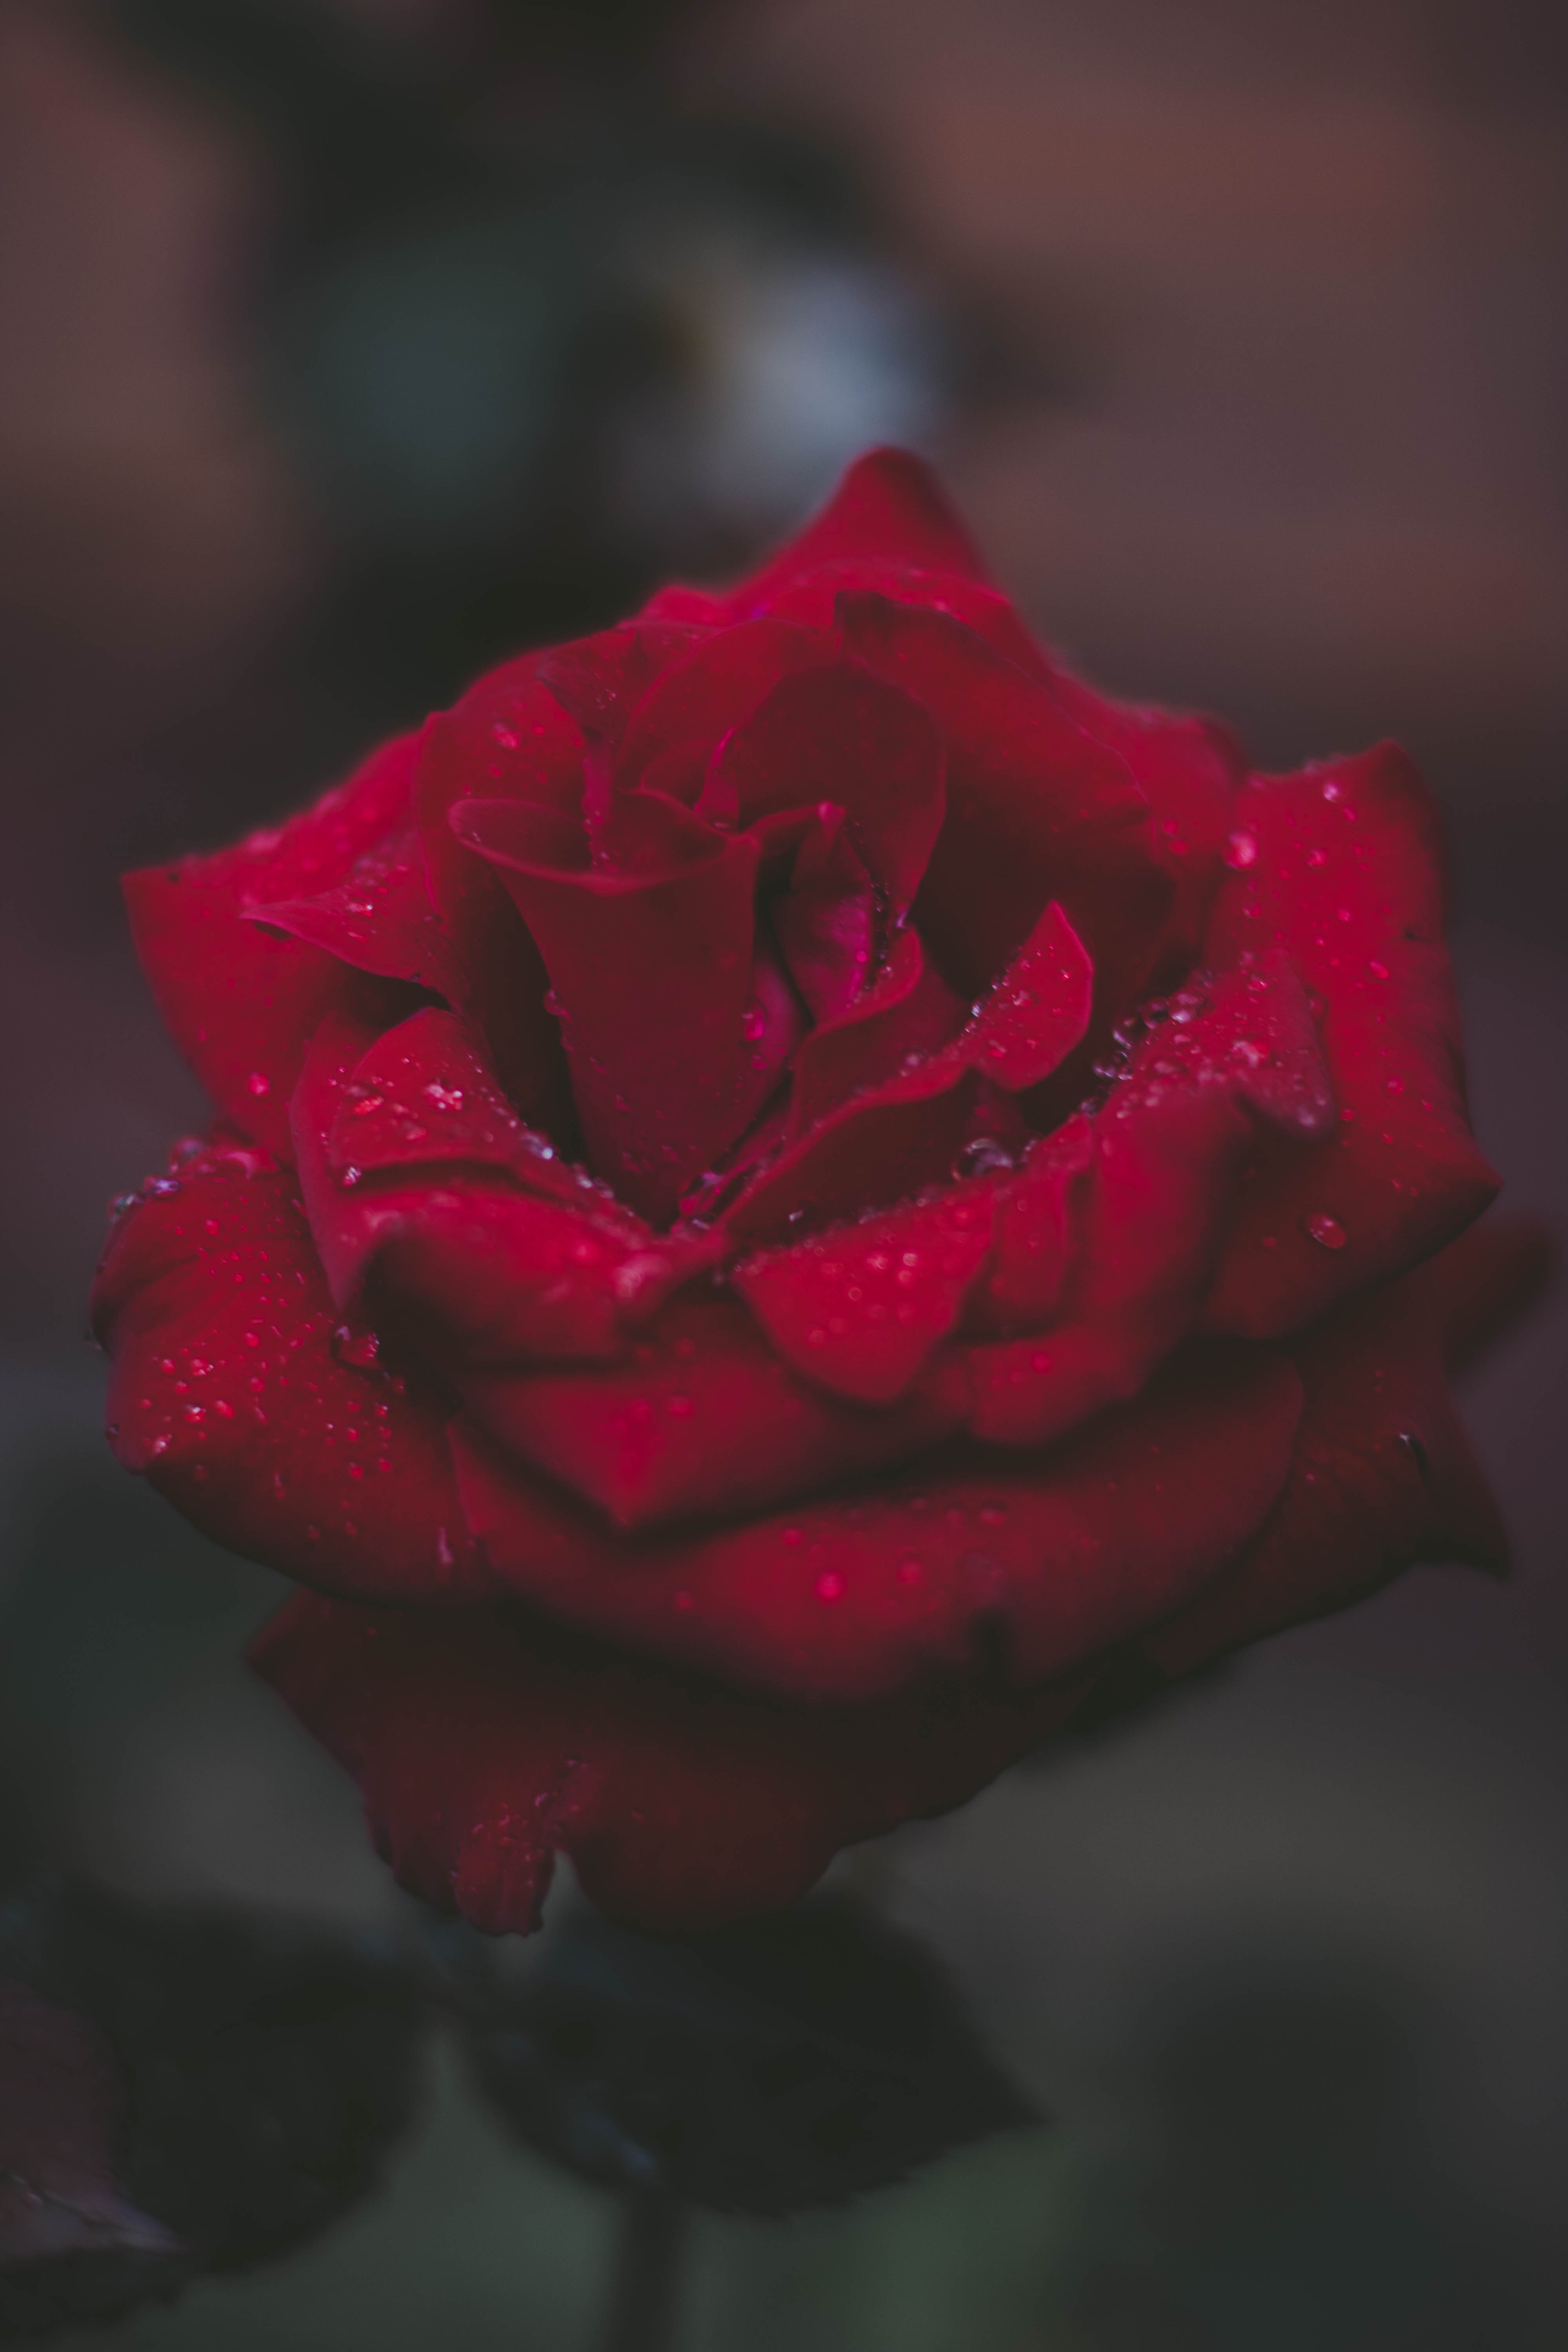 Rose Meanings - The Red Rose